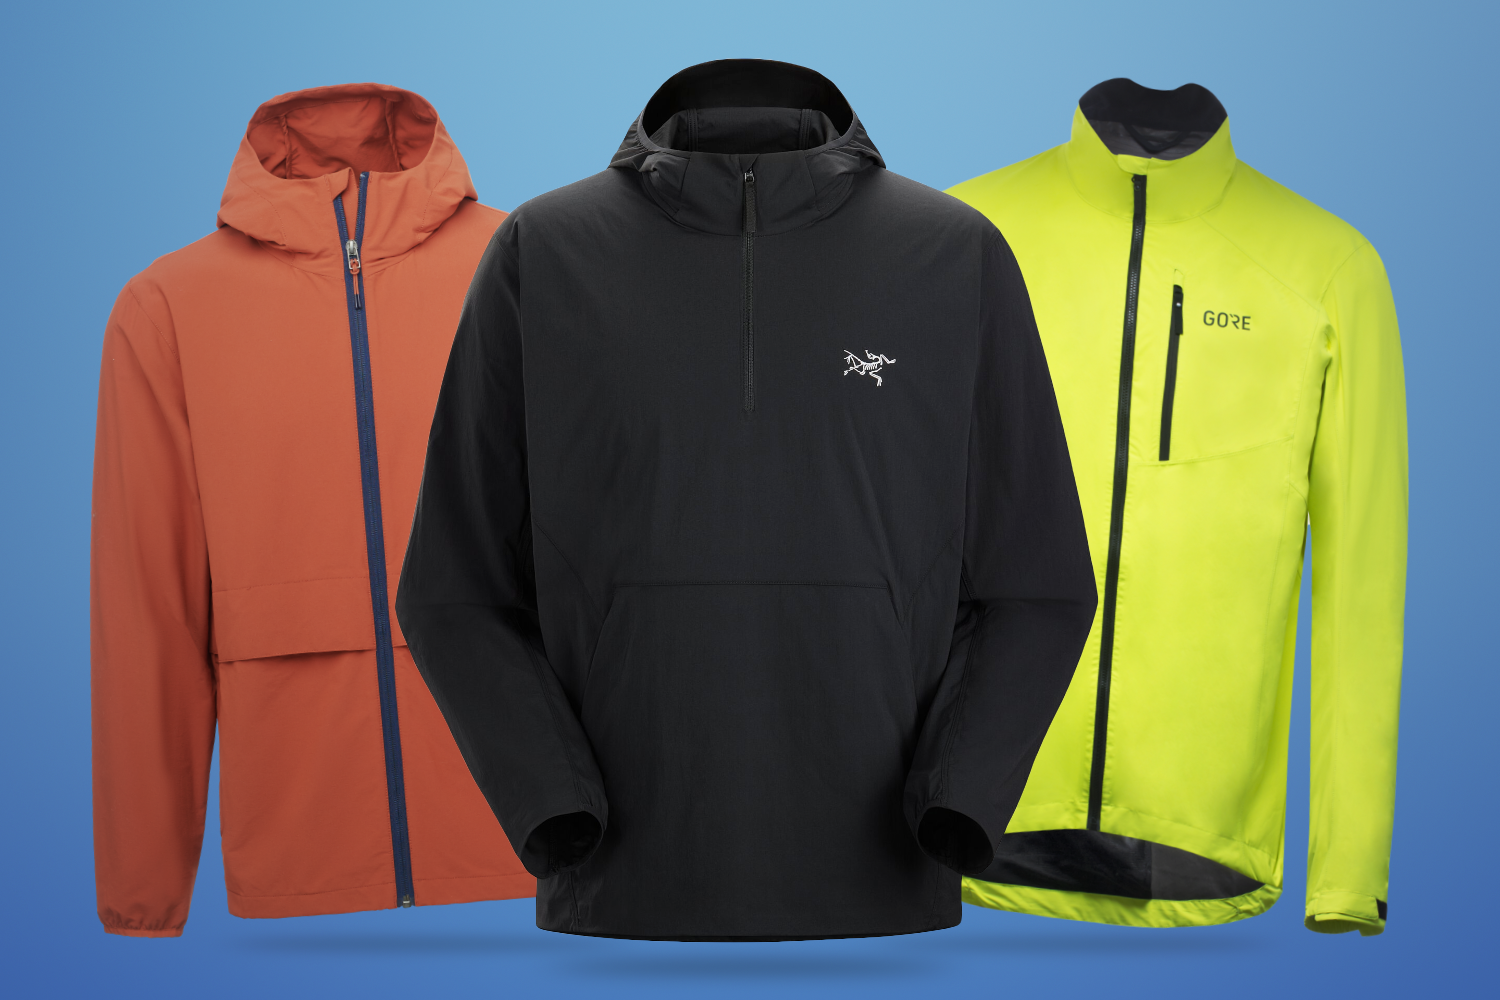 arcteryx acrople jacketArcteryx Acrople Jacket Mens Products 